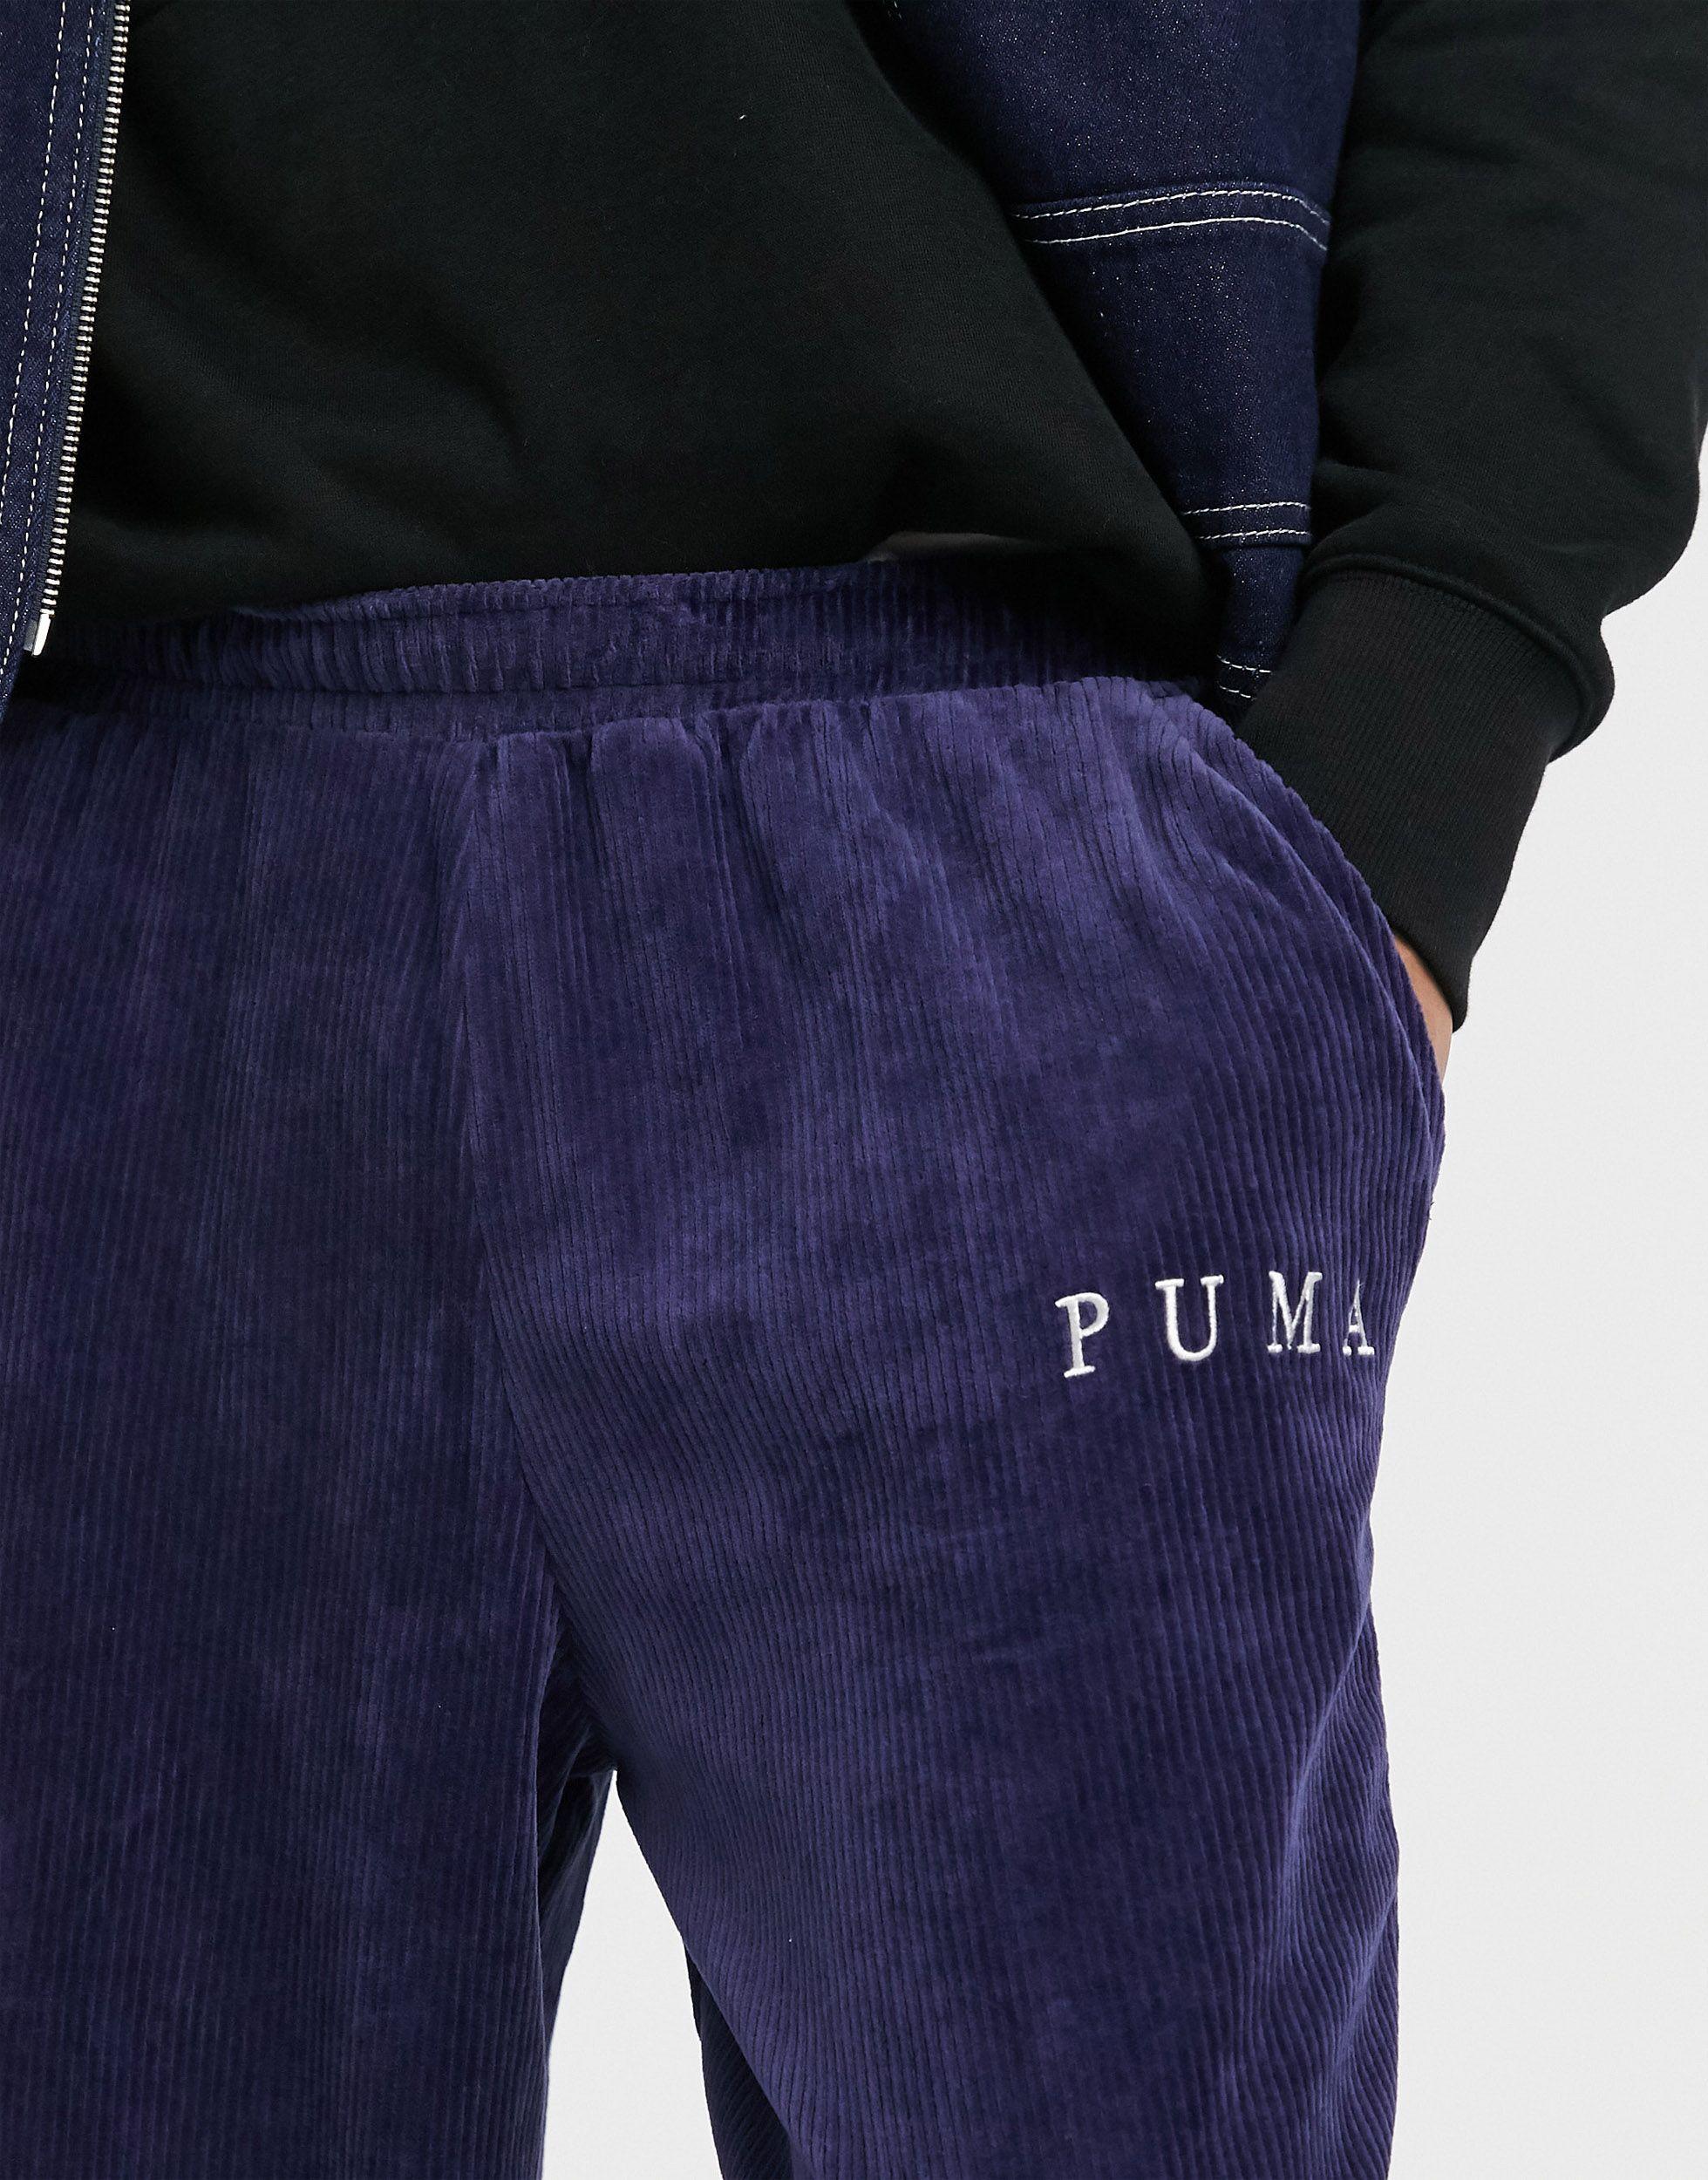 PUMA Cotton Cord joggers in Navy (Blue) for Men - Lyst